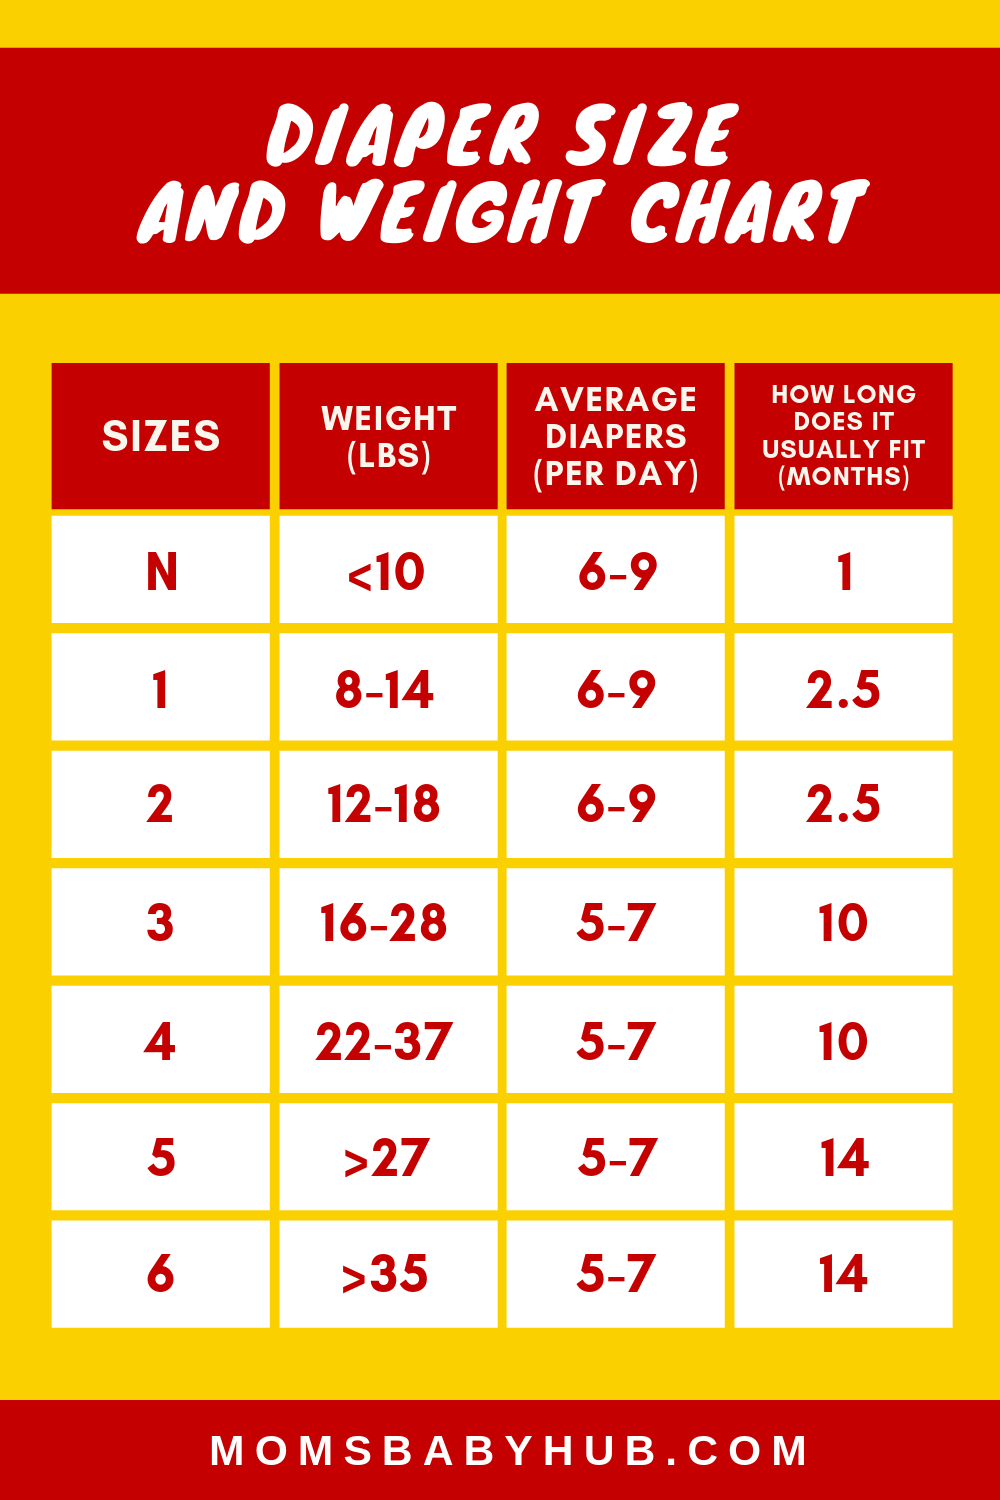 DIAPER SIZE and Weight chart